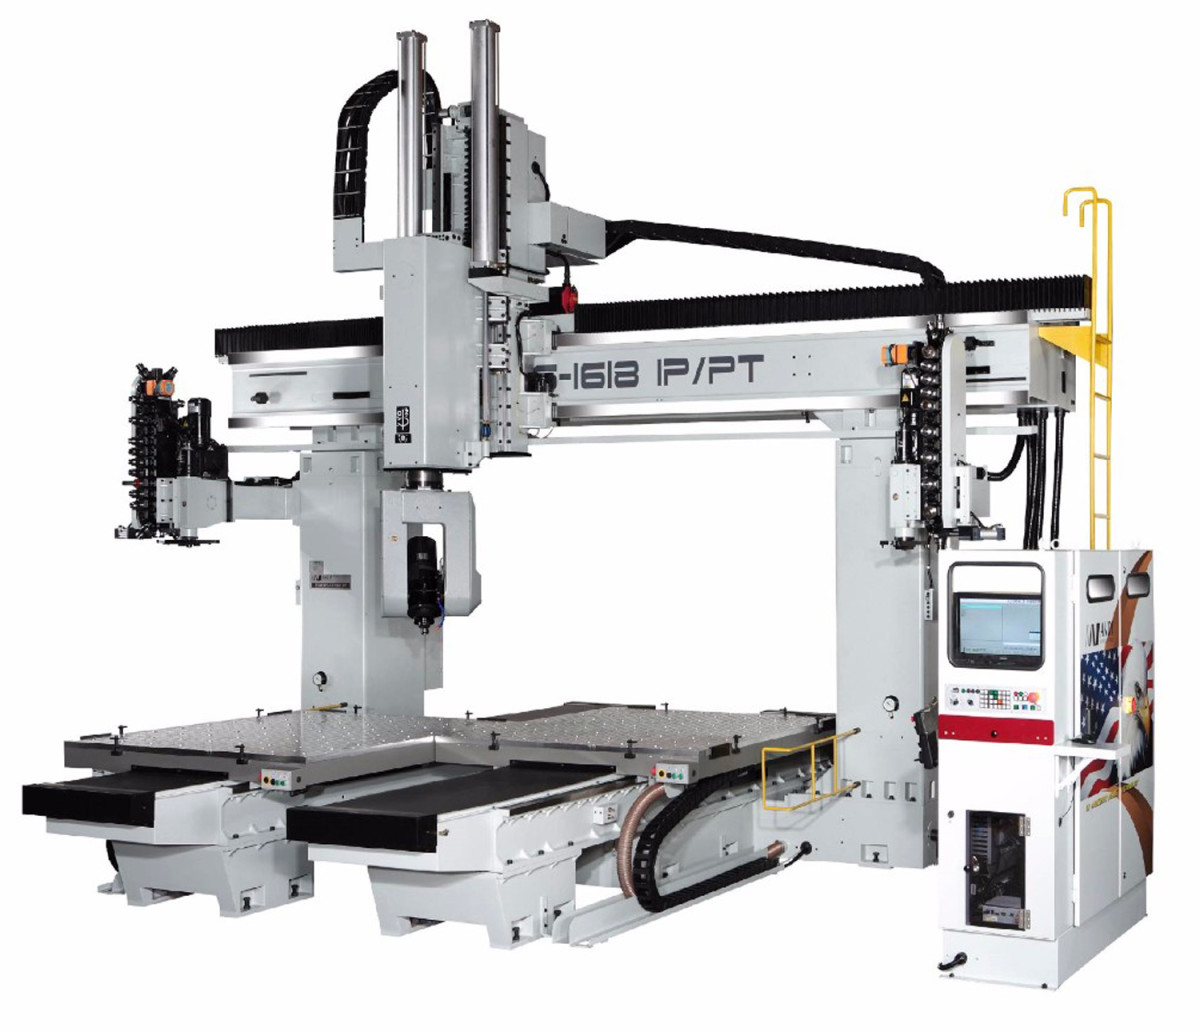 Anderson America’s offerings include the Axxiom Series of 5-axis machining centers with a moving table.